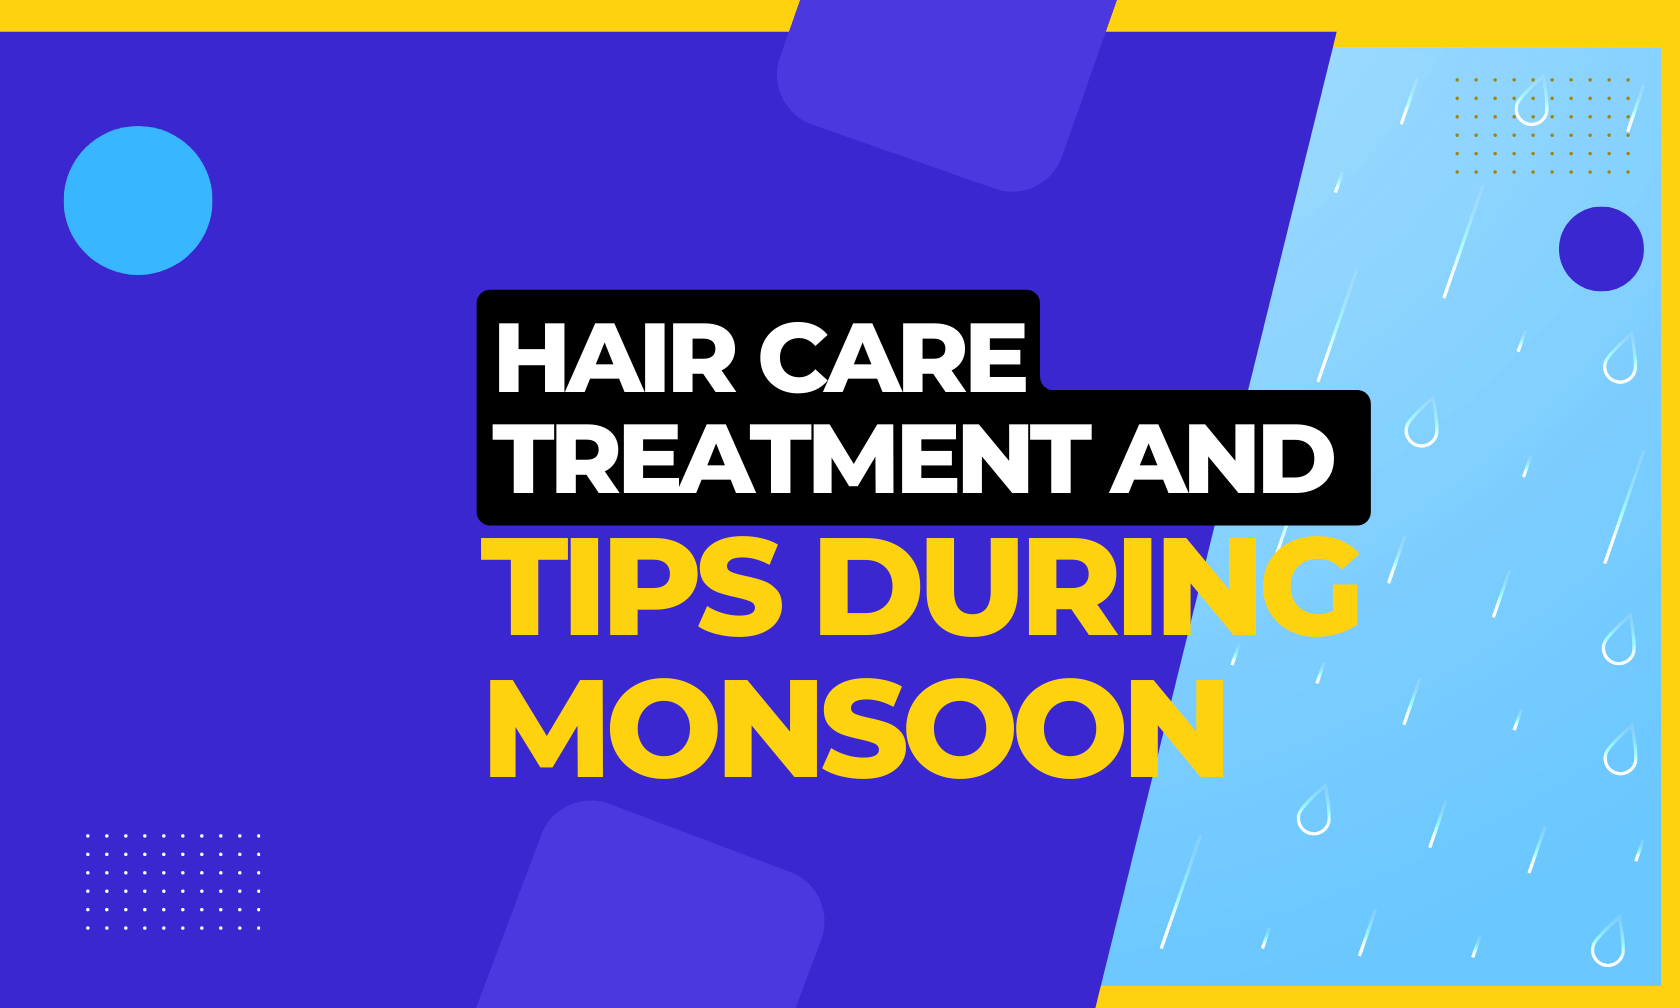 Hair care treatment and tips during Monsoon